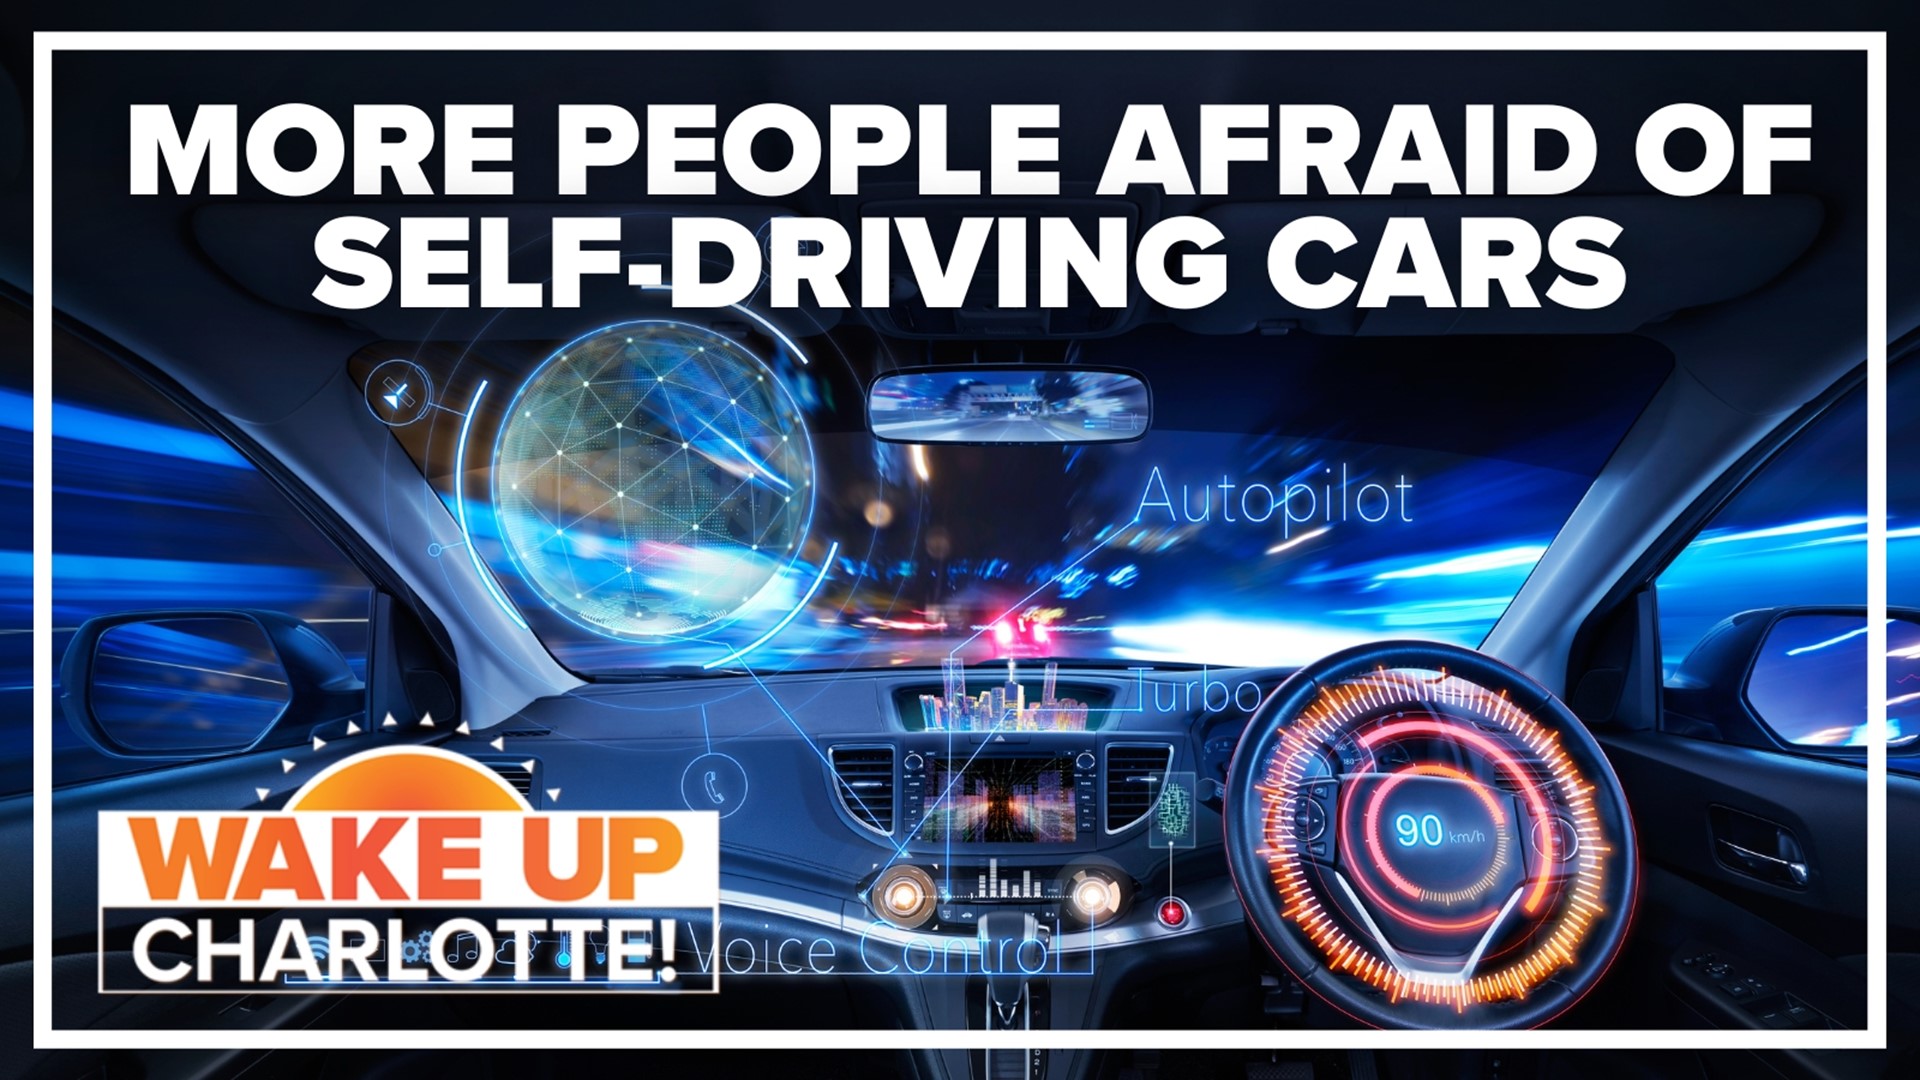 Right now, a self-driving vehicle only works in certain situations. They're mainly operated on highways and a person has to be ready to take control.